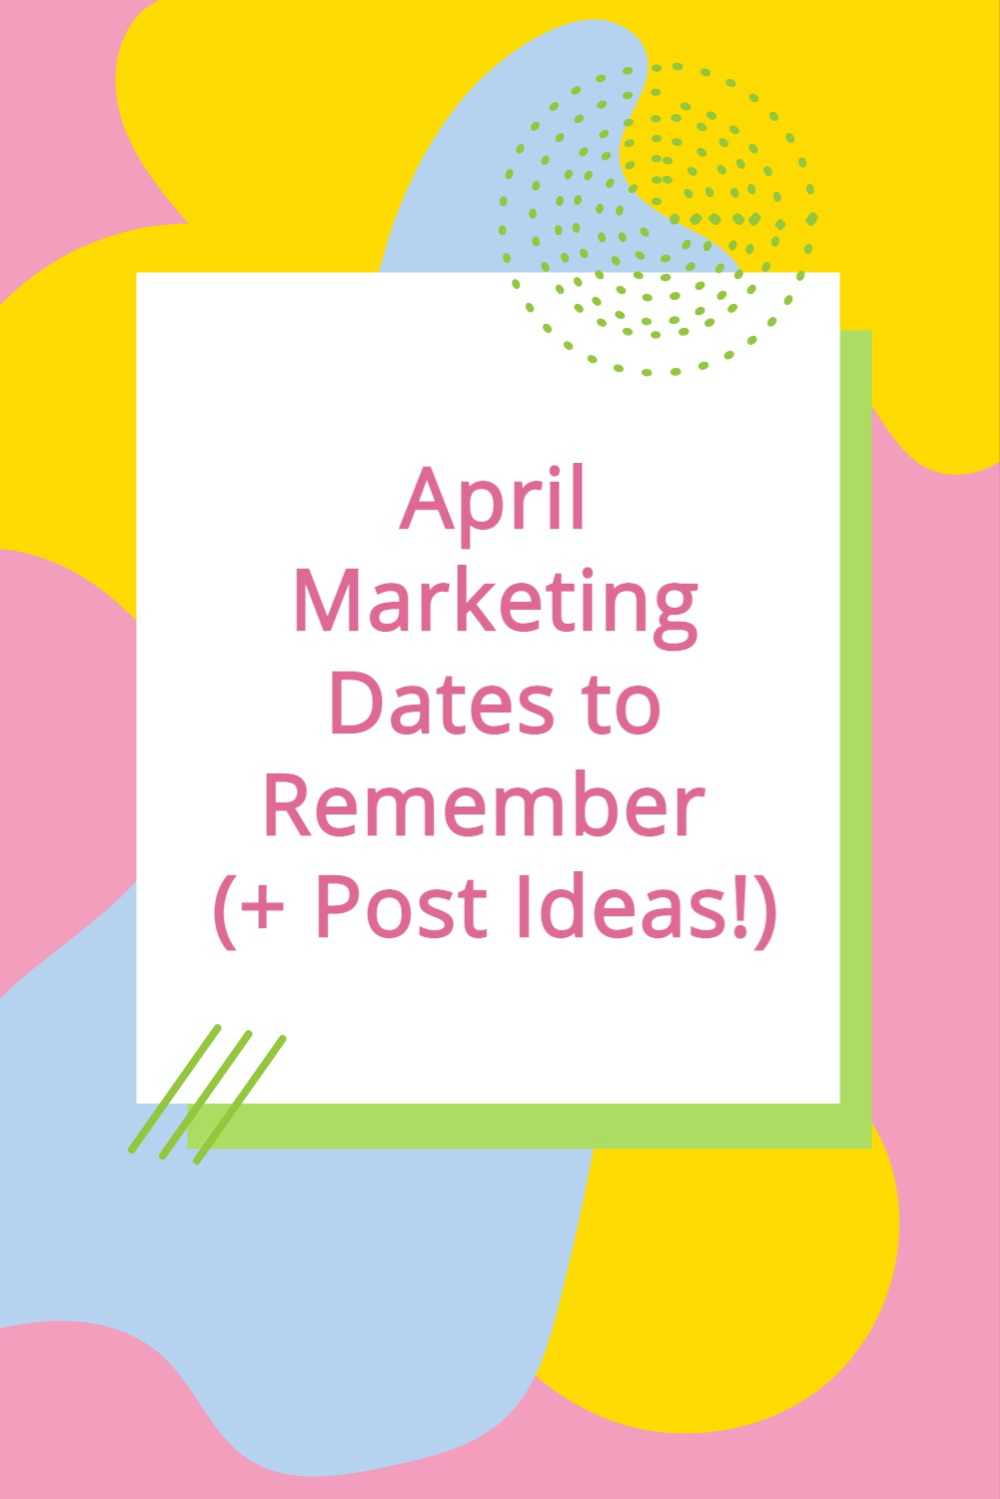 April Marketing Dates to Remember (+ Post Ideas!)